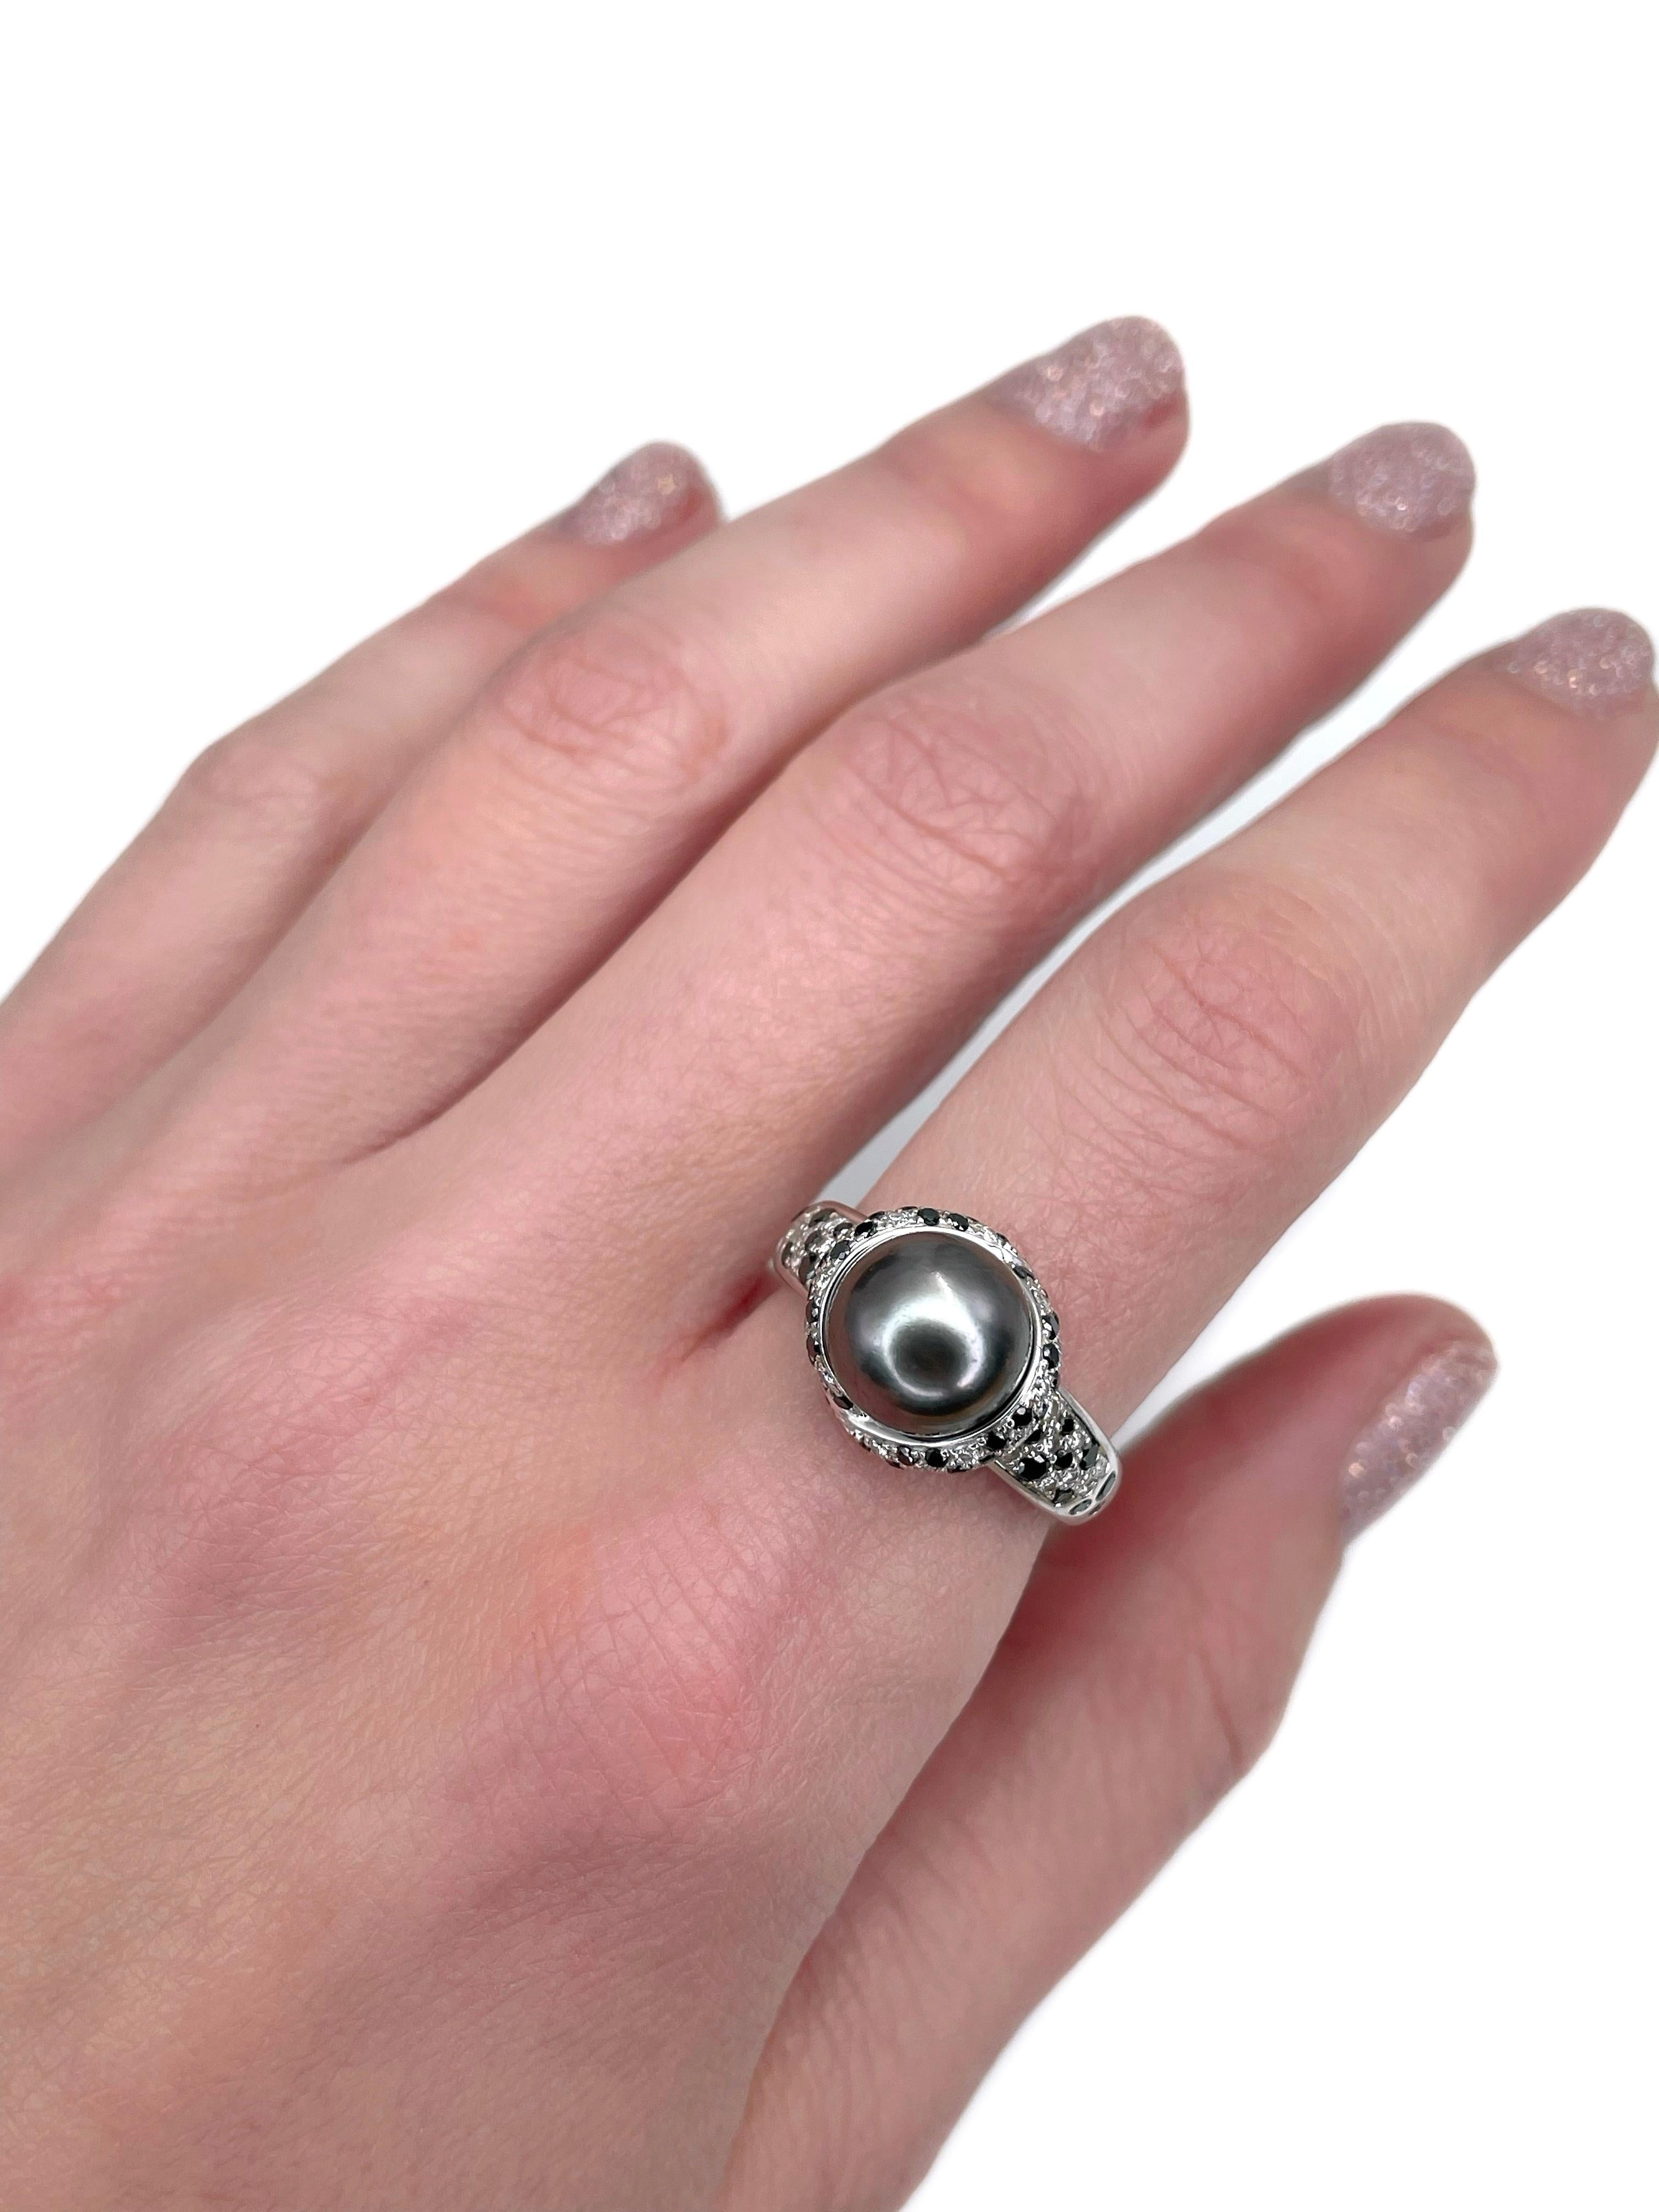 This is an amazing ring designed by Mauboussin for the “Caviar Mon Amour” collection. Circa 2000. 

It is crafted in 18K white gold. The piece features:
- 1 cultured Tahitian pearl
- 34 diamonds (round brilliant cut, TW 0.17ct, RW-W, VS-SI)
- 53